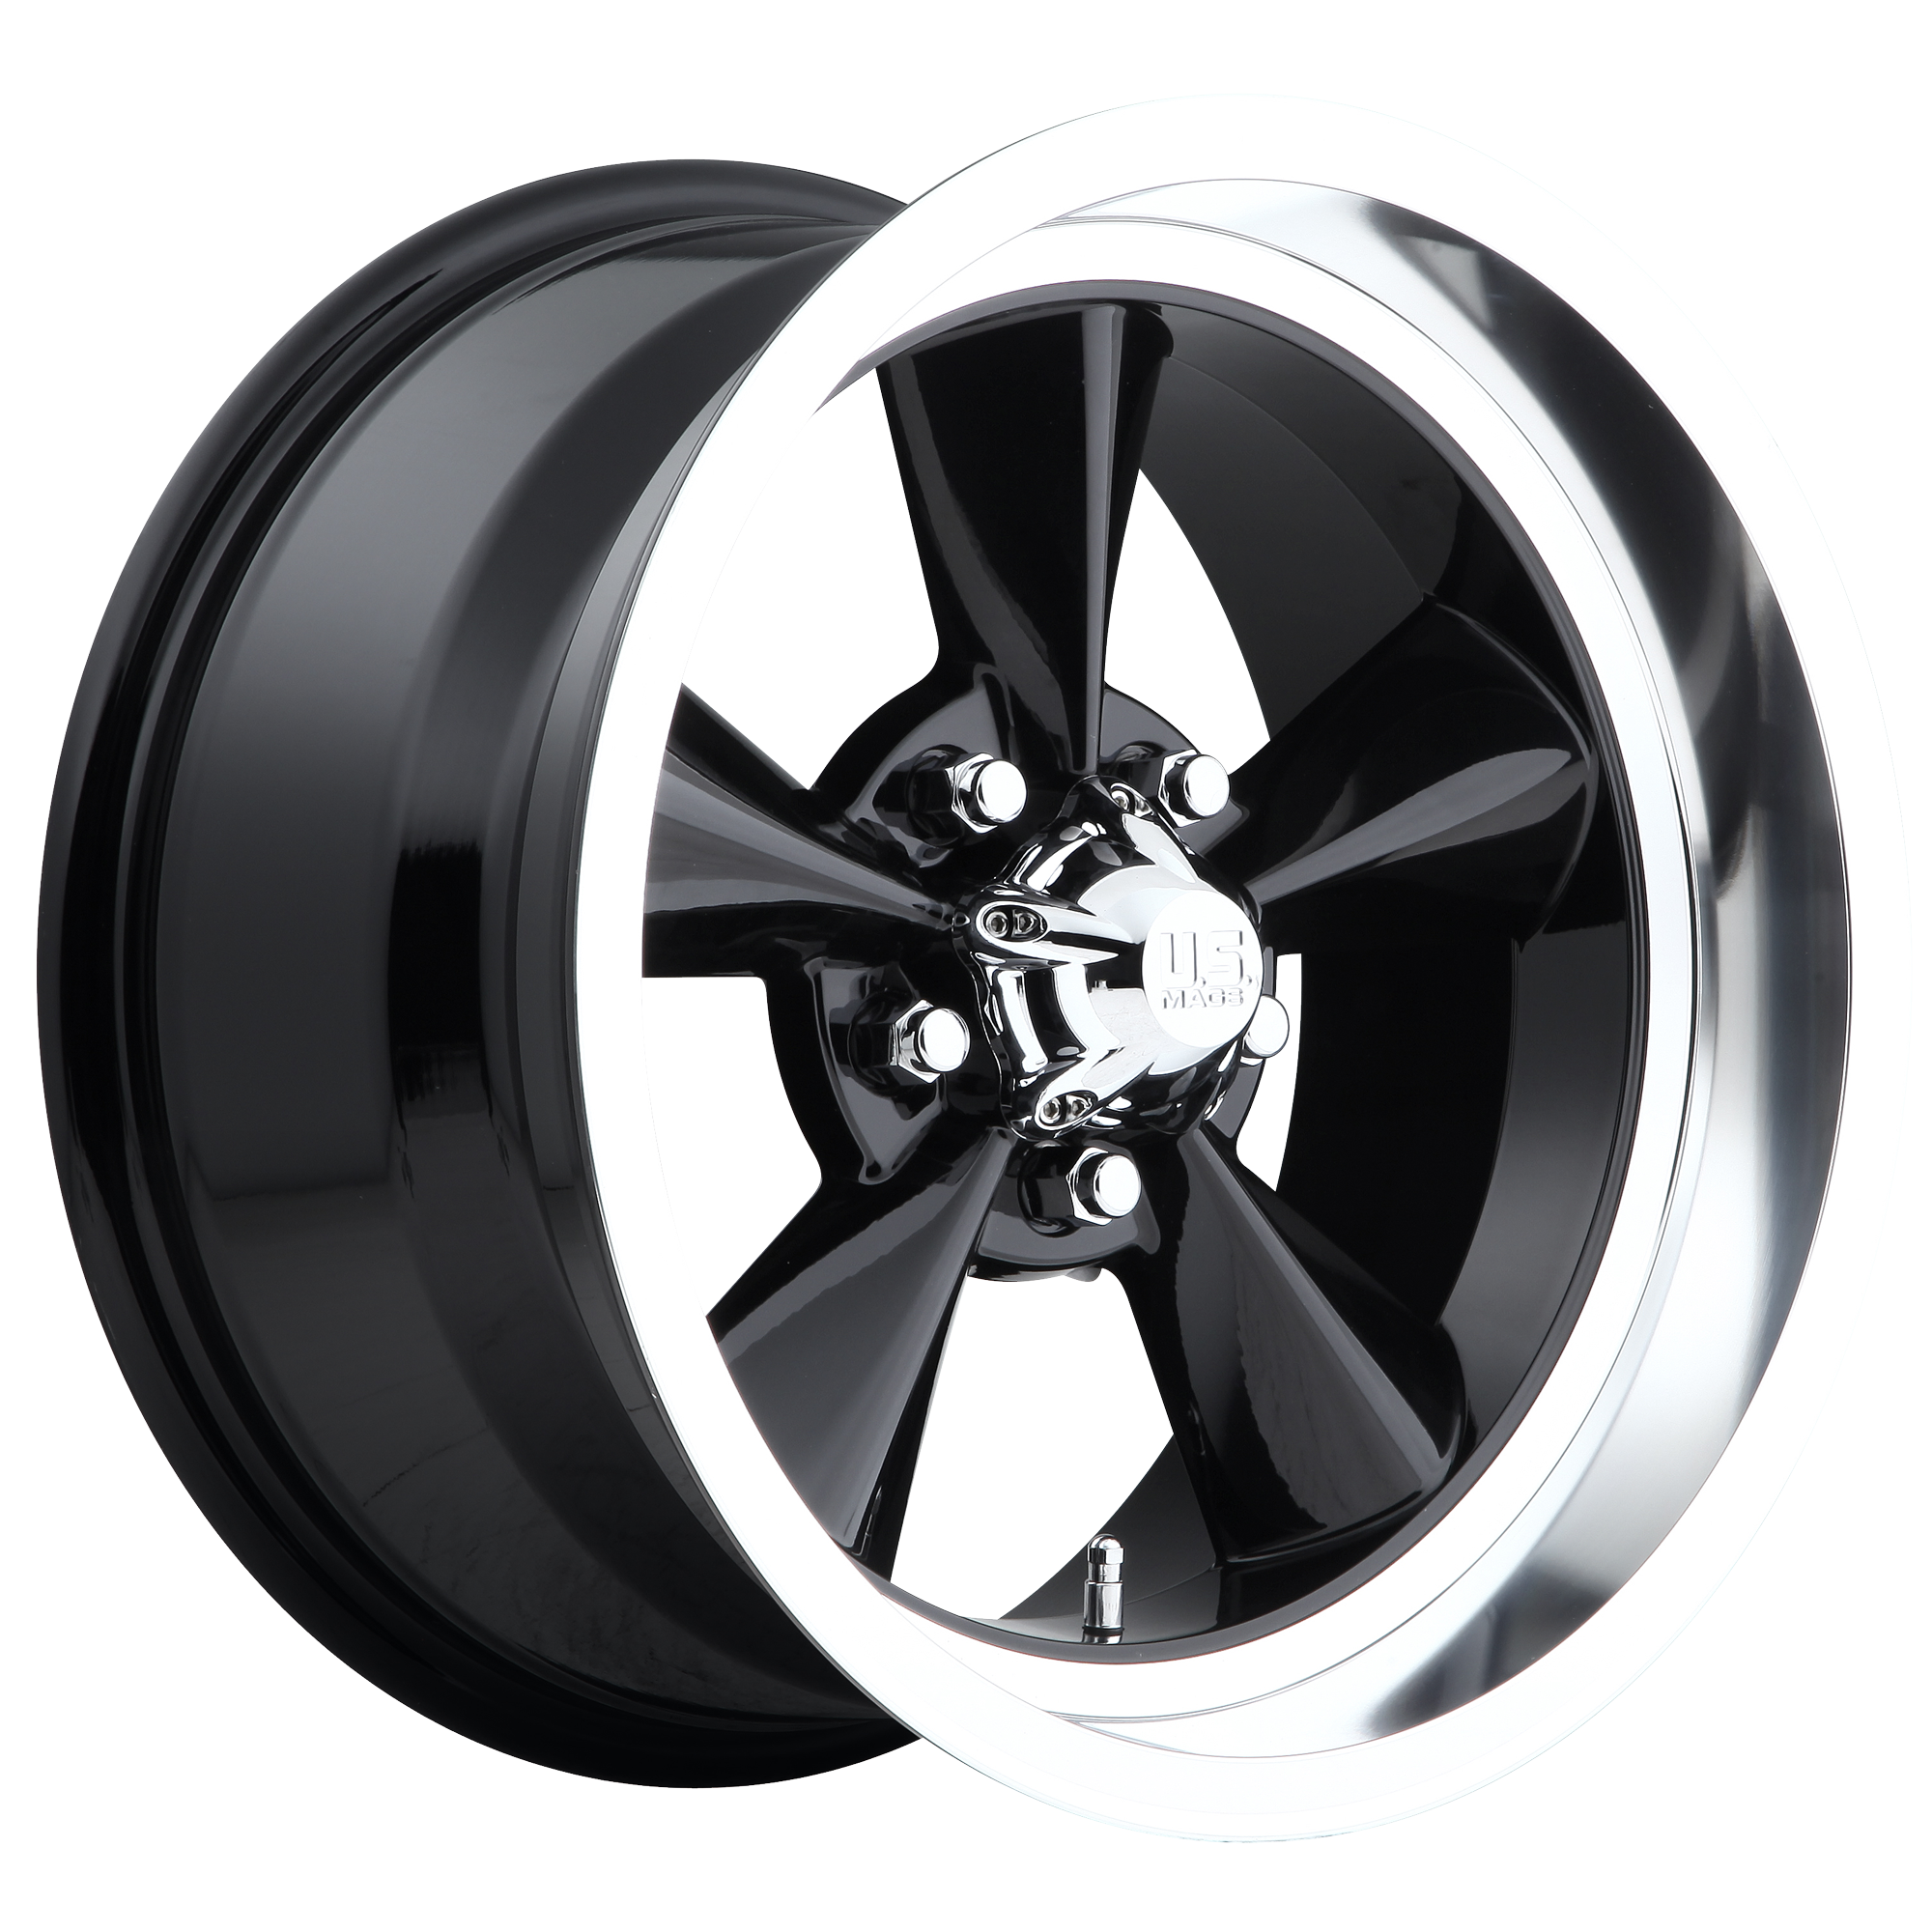 STANDARD 17x8 5x120.65 GLOSS BLACK (1 mm) - Tires and Engine Performance